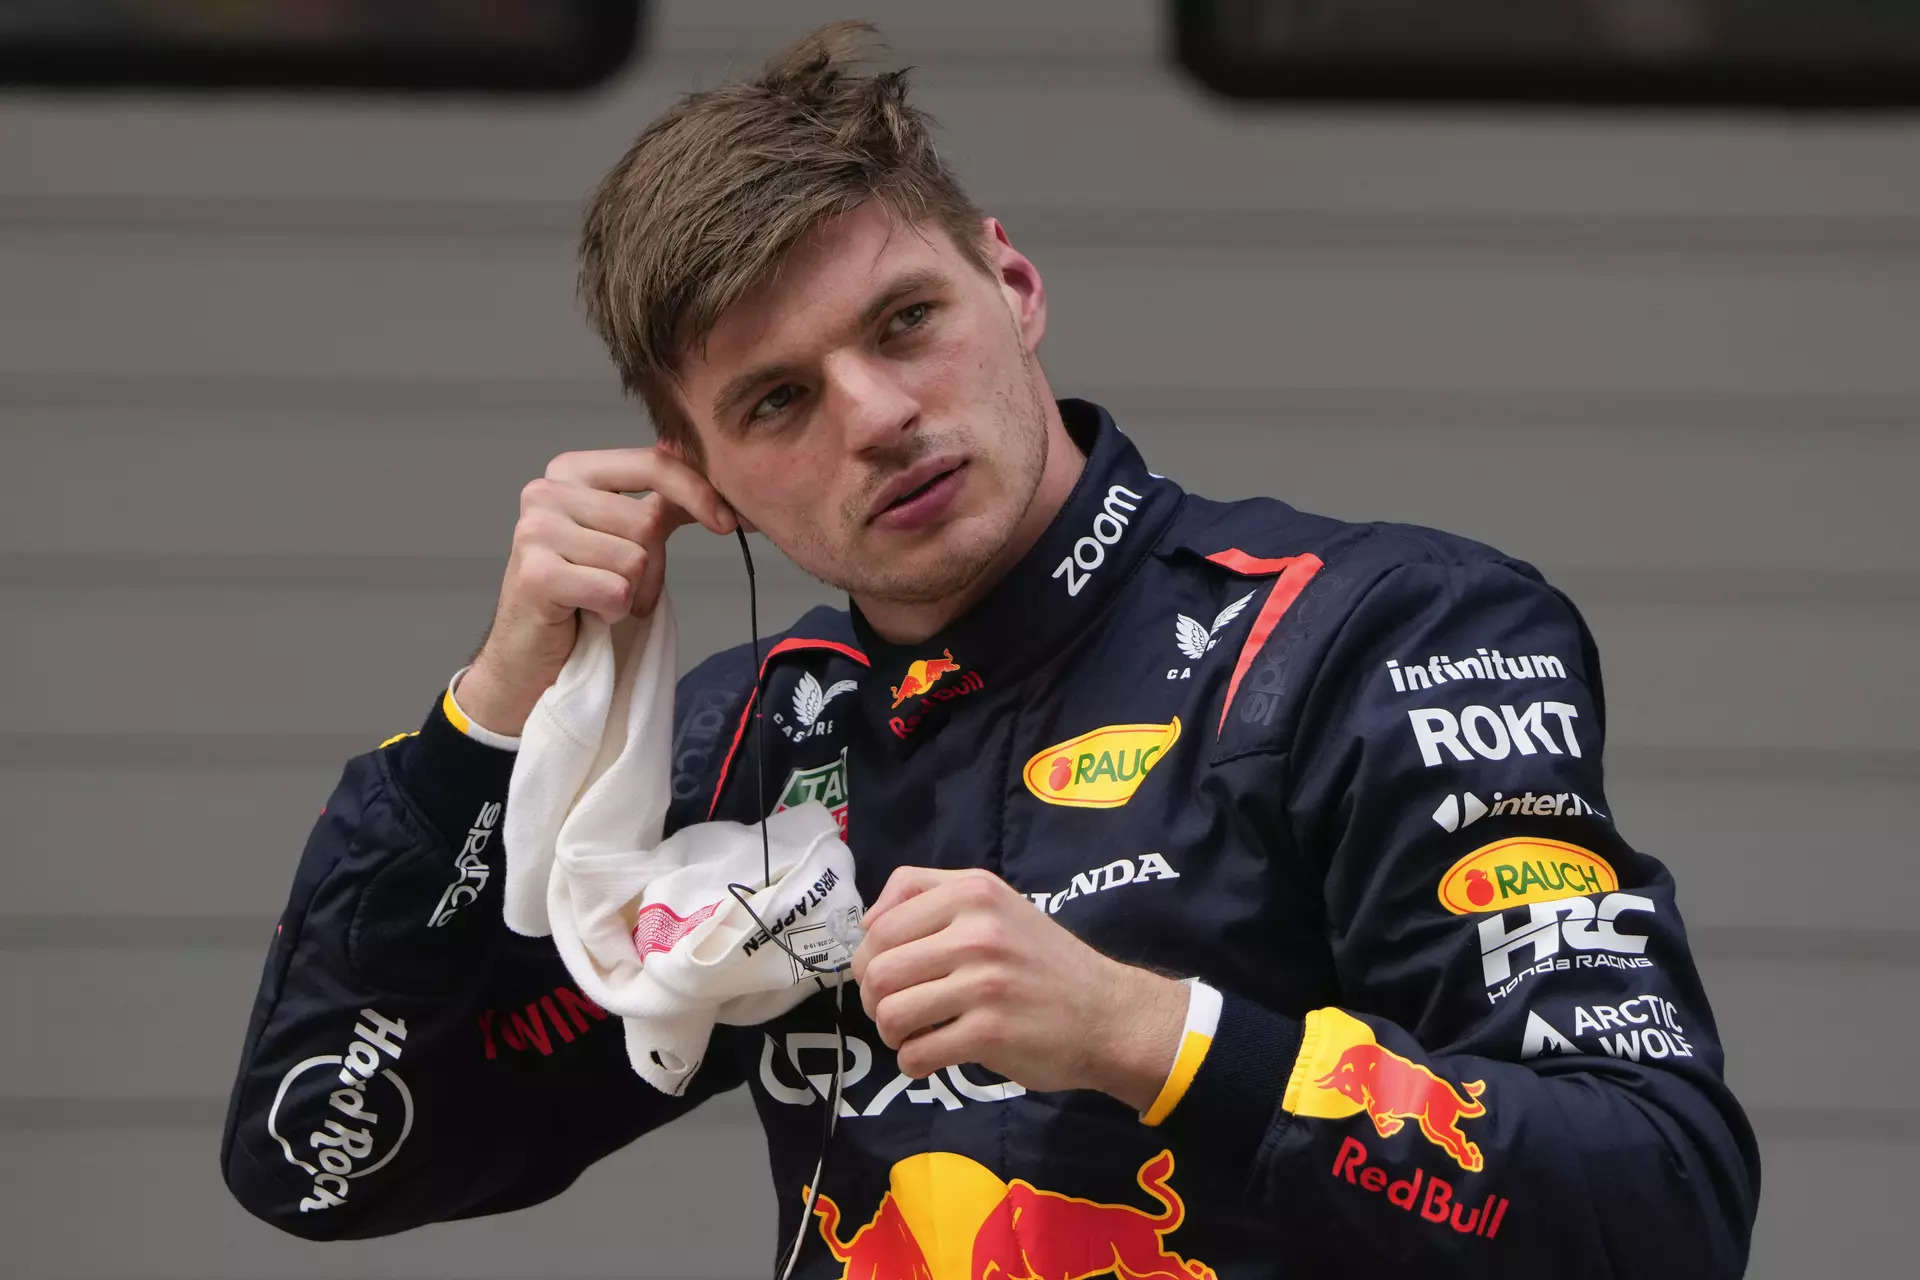 Max Verstappen takes pole for Chinese GP to extend F1 dominance. Hamilton 18th